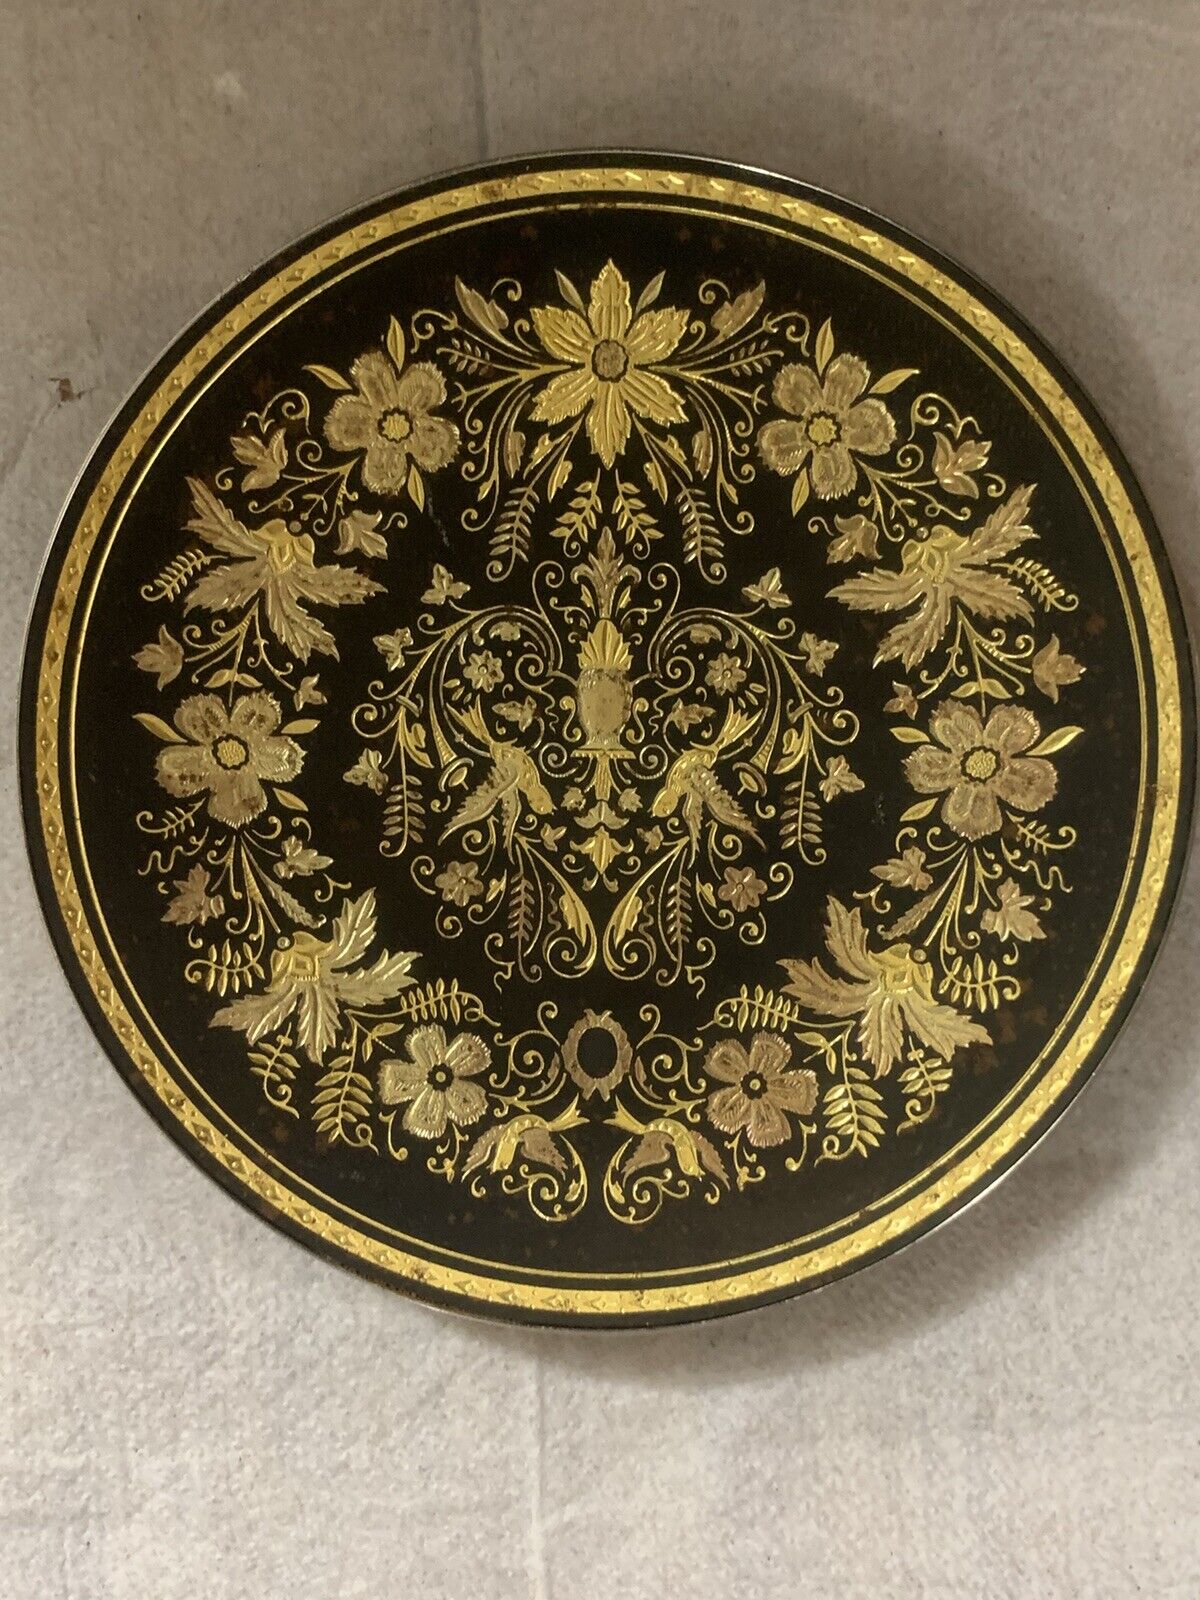 Damascene Toledo Gold Inlaid Birds Intricate Plate / footed dish 6.5